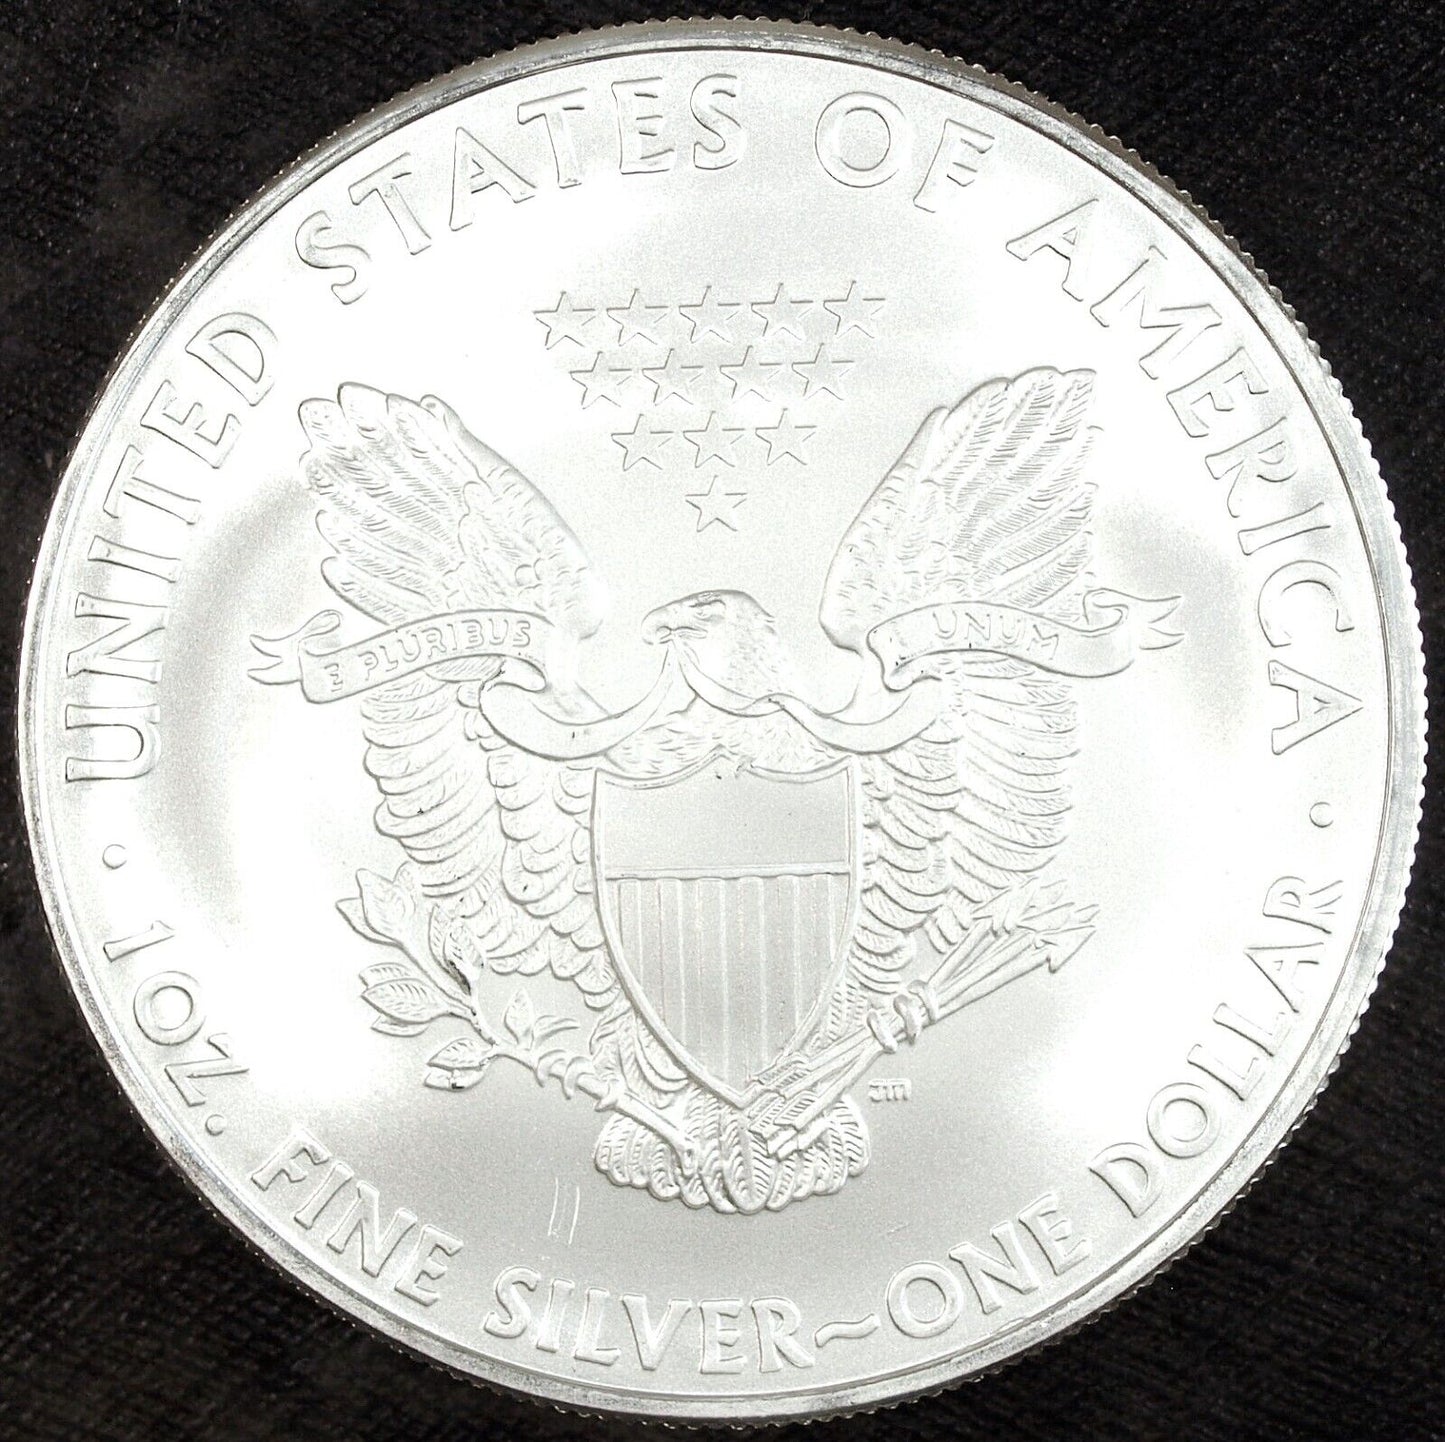 2010 U.S. Mint American Silver Eagle ☆☆ Uncirculated ☆☆ Great Collectible 121